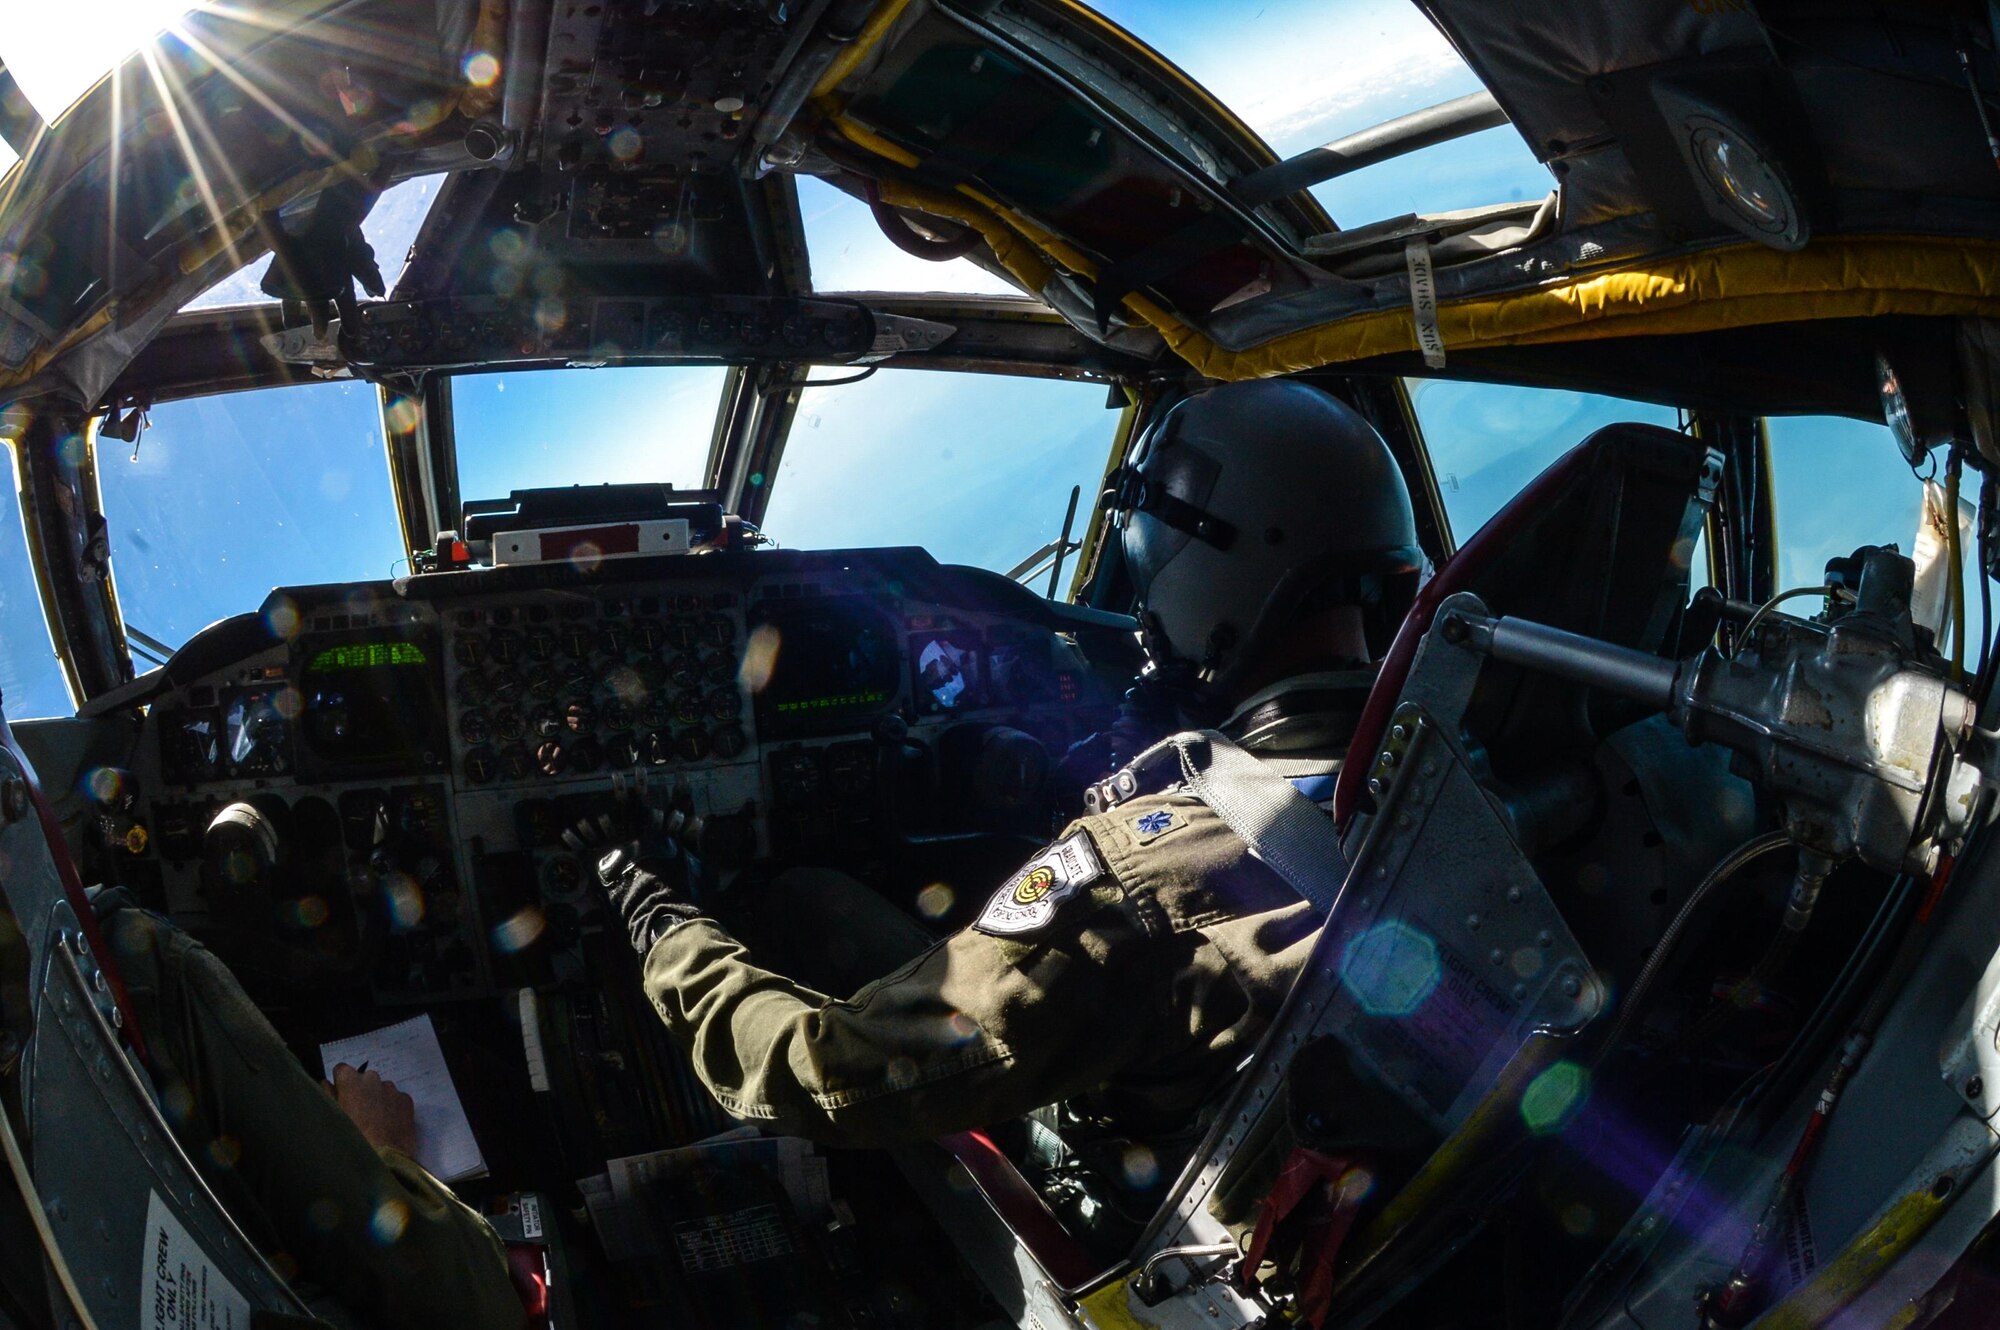 Lt. Col. Erik Johnson, 340th Weapons Squadron commander, presses forward on the throttles of a B-52 Stratofortress during a training mission above the Gulf of Mexico Oct. 13, 2016. Two B-52s from Barksdale Air Force Base, La., and two B-1 Lancers from Dyess Air Force Base, Texas, flew together and performed more than 200 simulated missile launches as part of a weapons school integration exercise. (U.S. Air Force photo/Senior Airman Curt Beach)